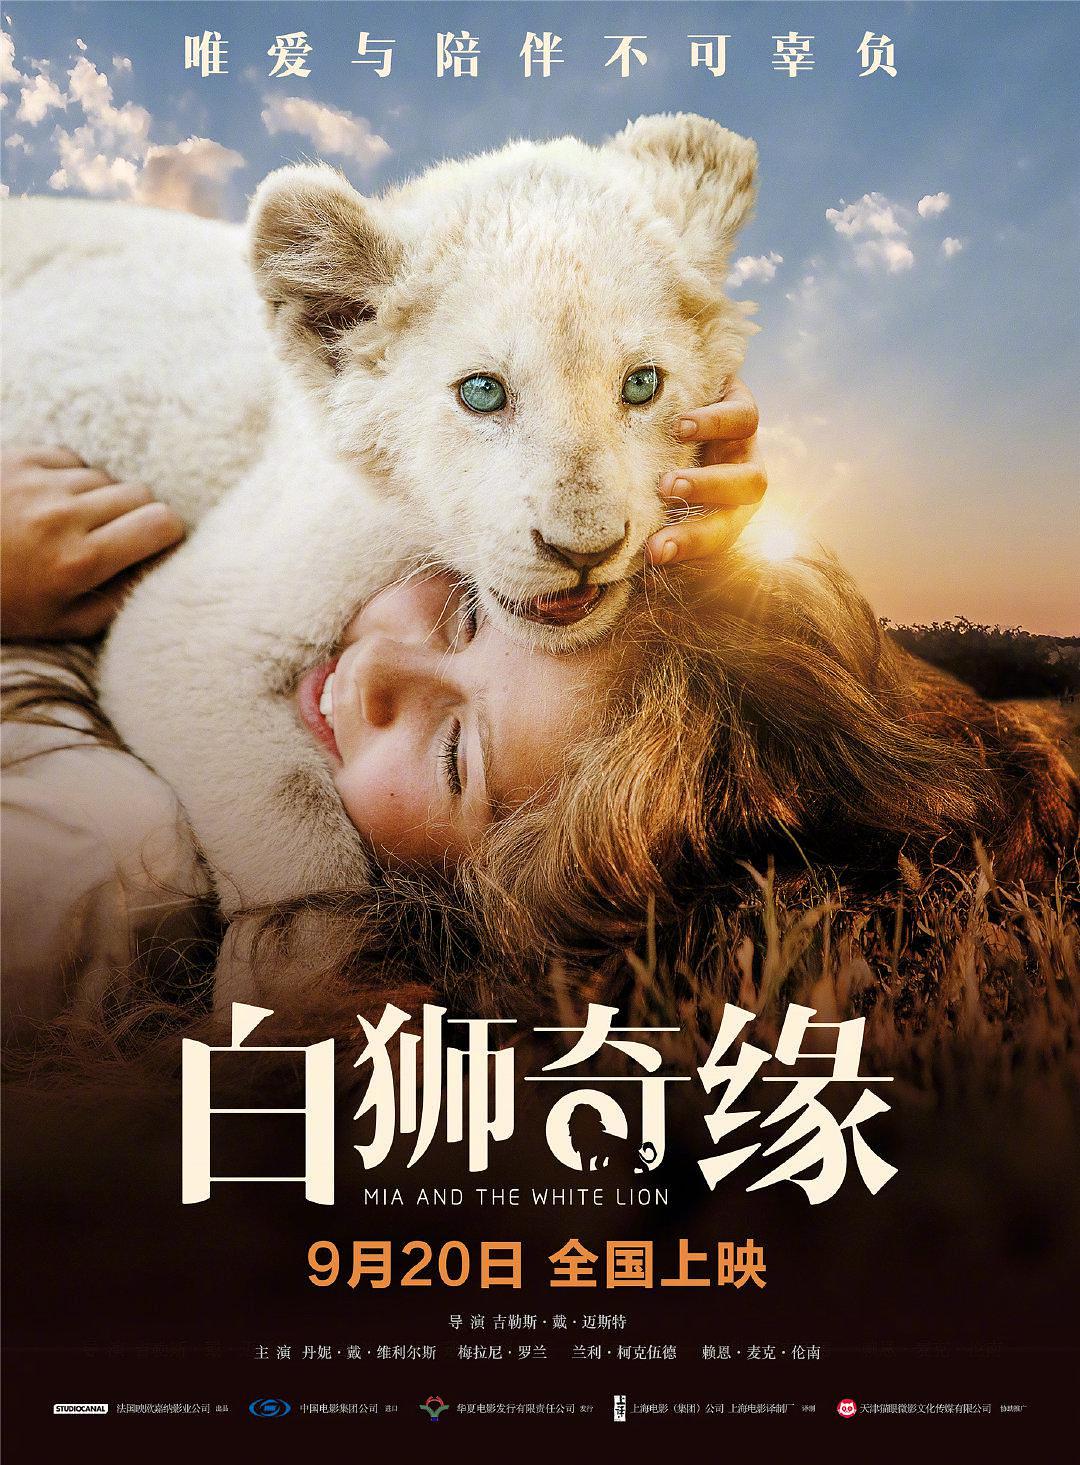 ʨԵ Mia.and.the.White.Lion.2018.DUBBED.720p.BluRay.x264-PussyFoot 4.37GB-1.png